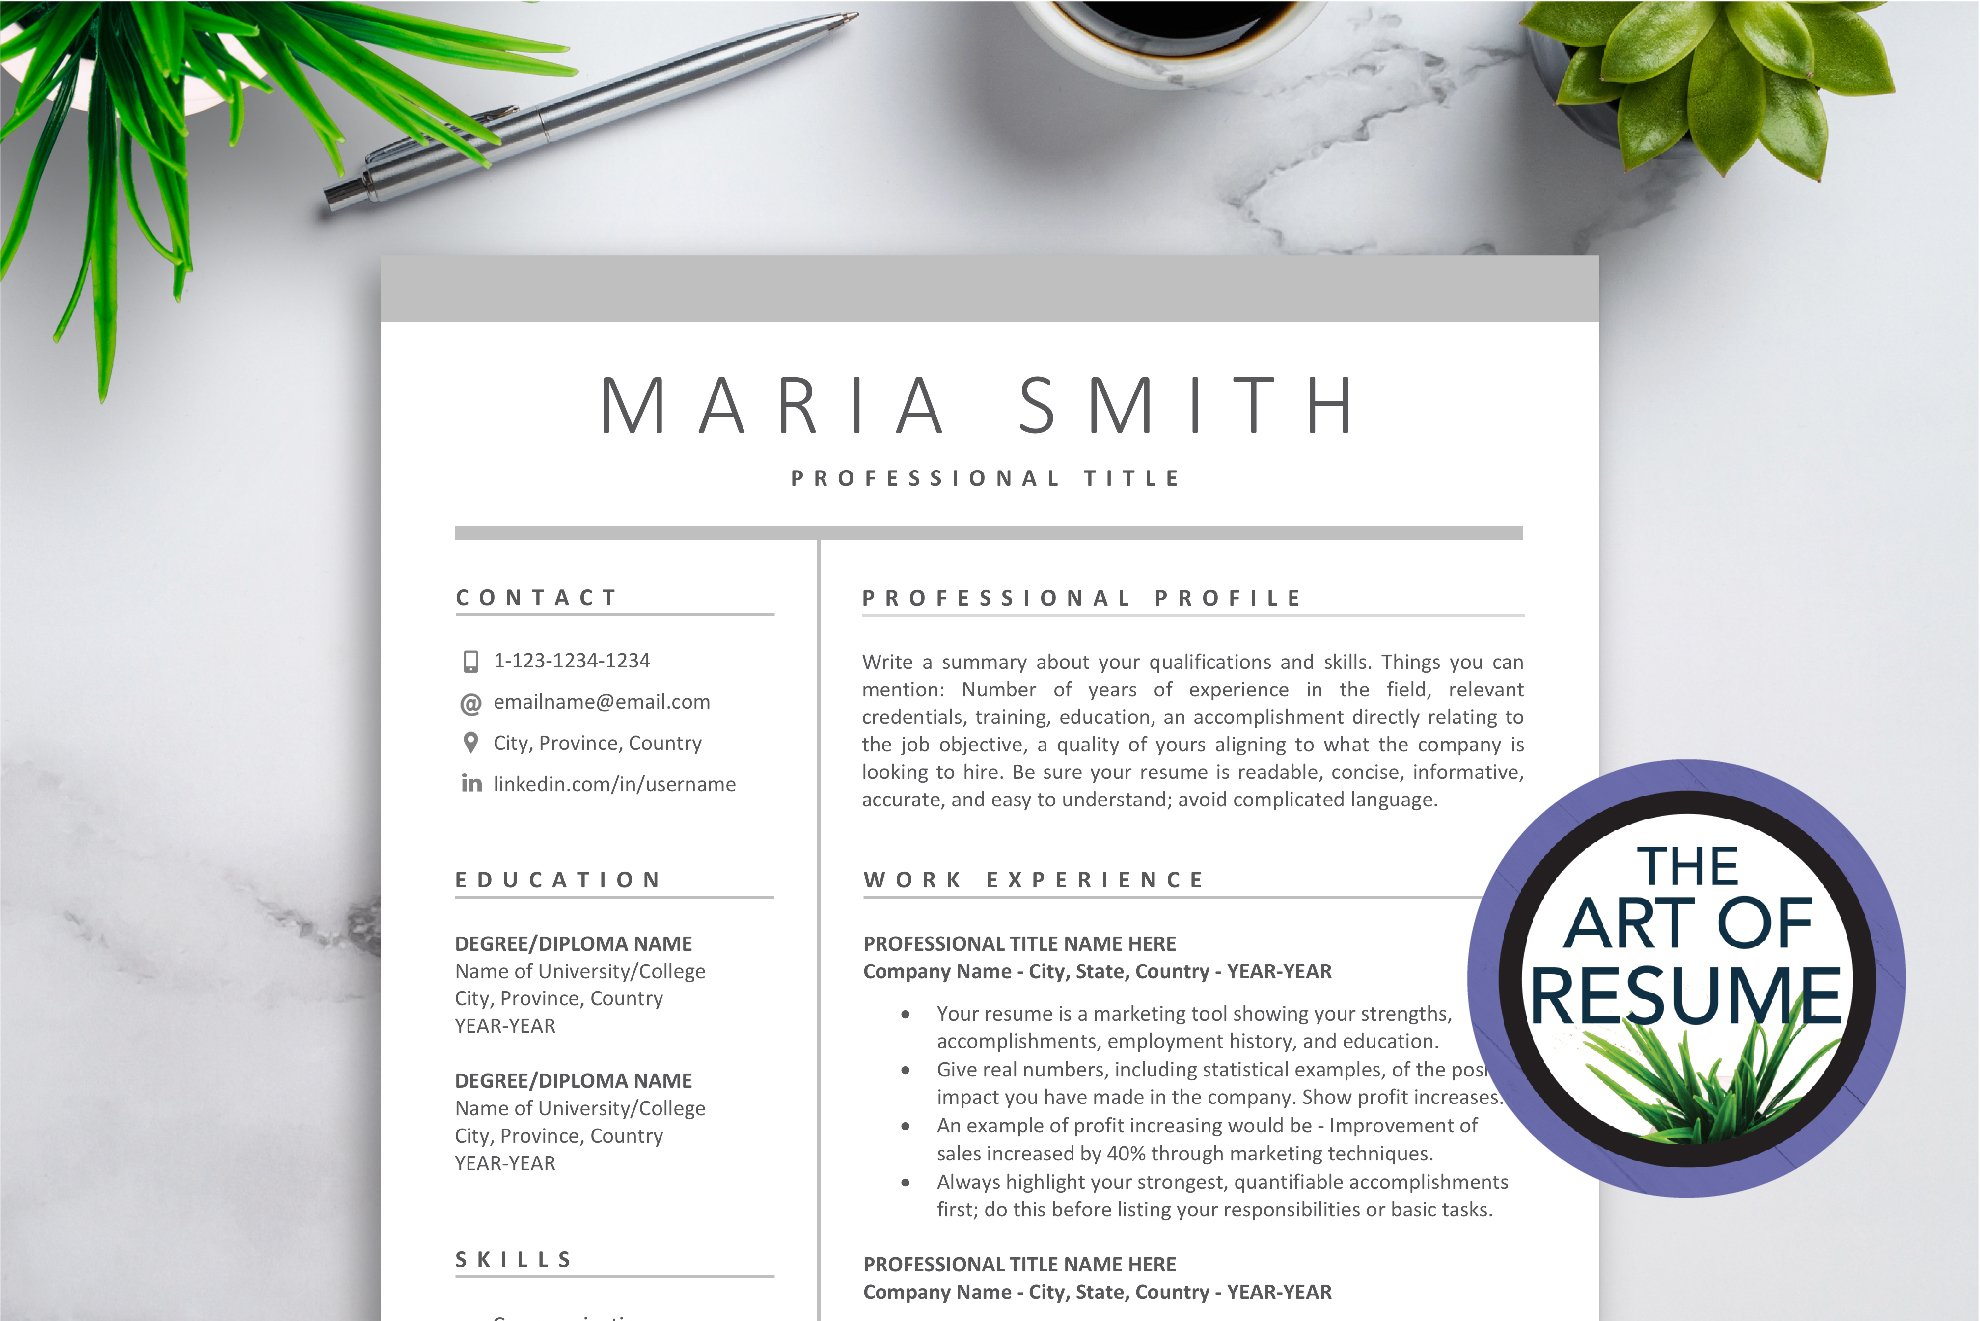 Resume Template & Free Cover Letter cover image.